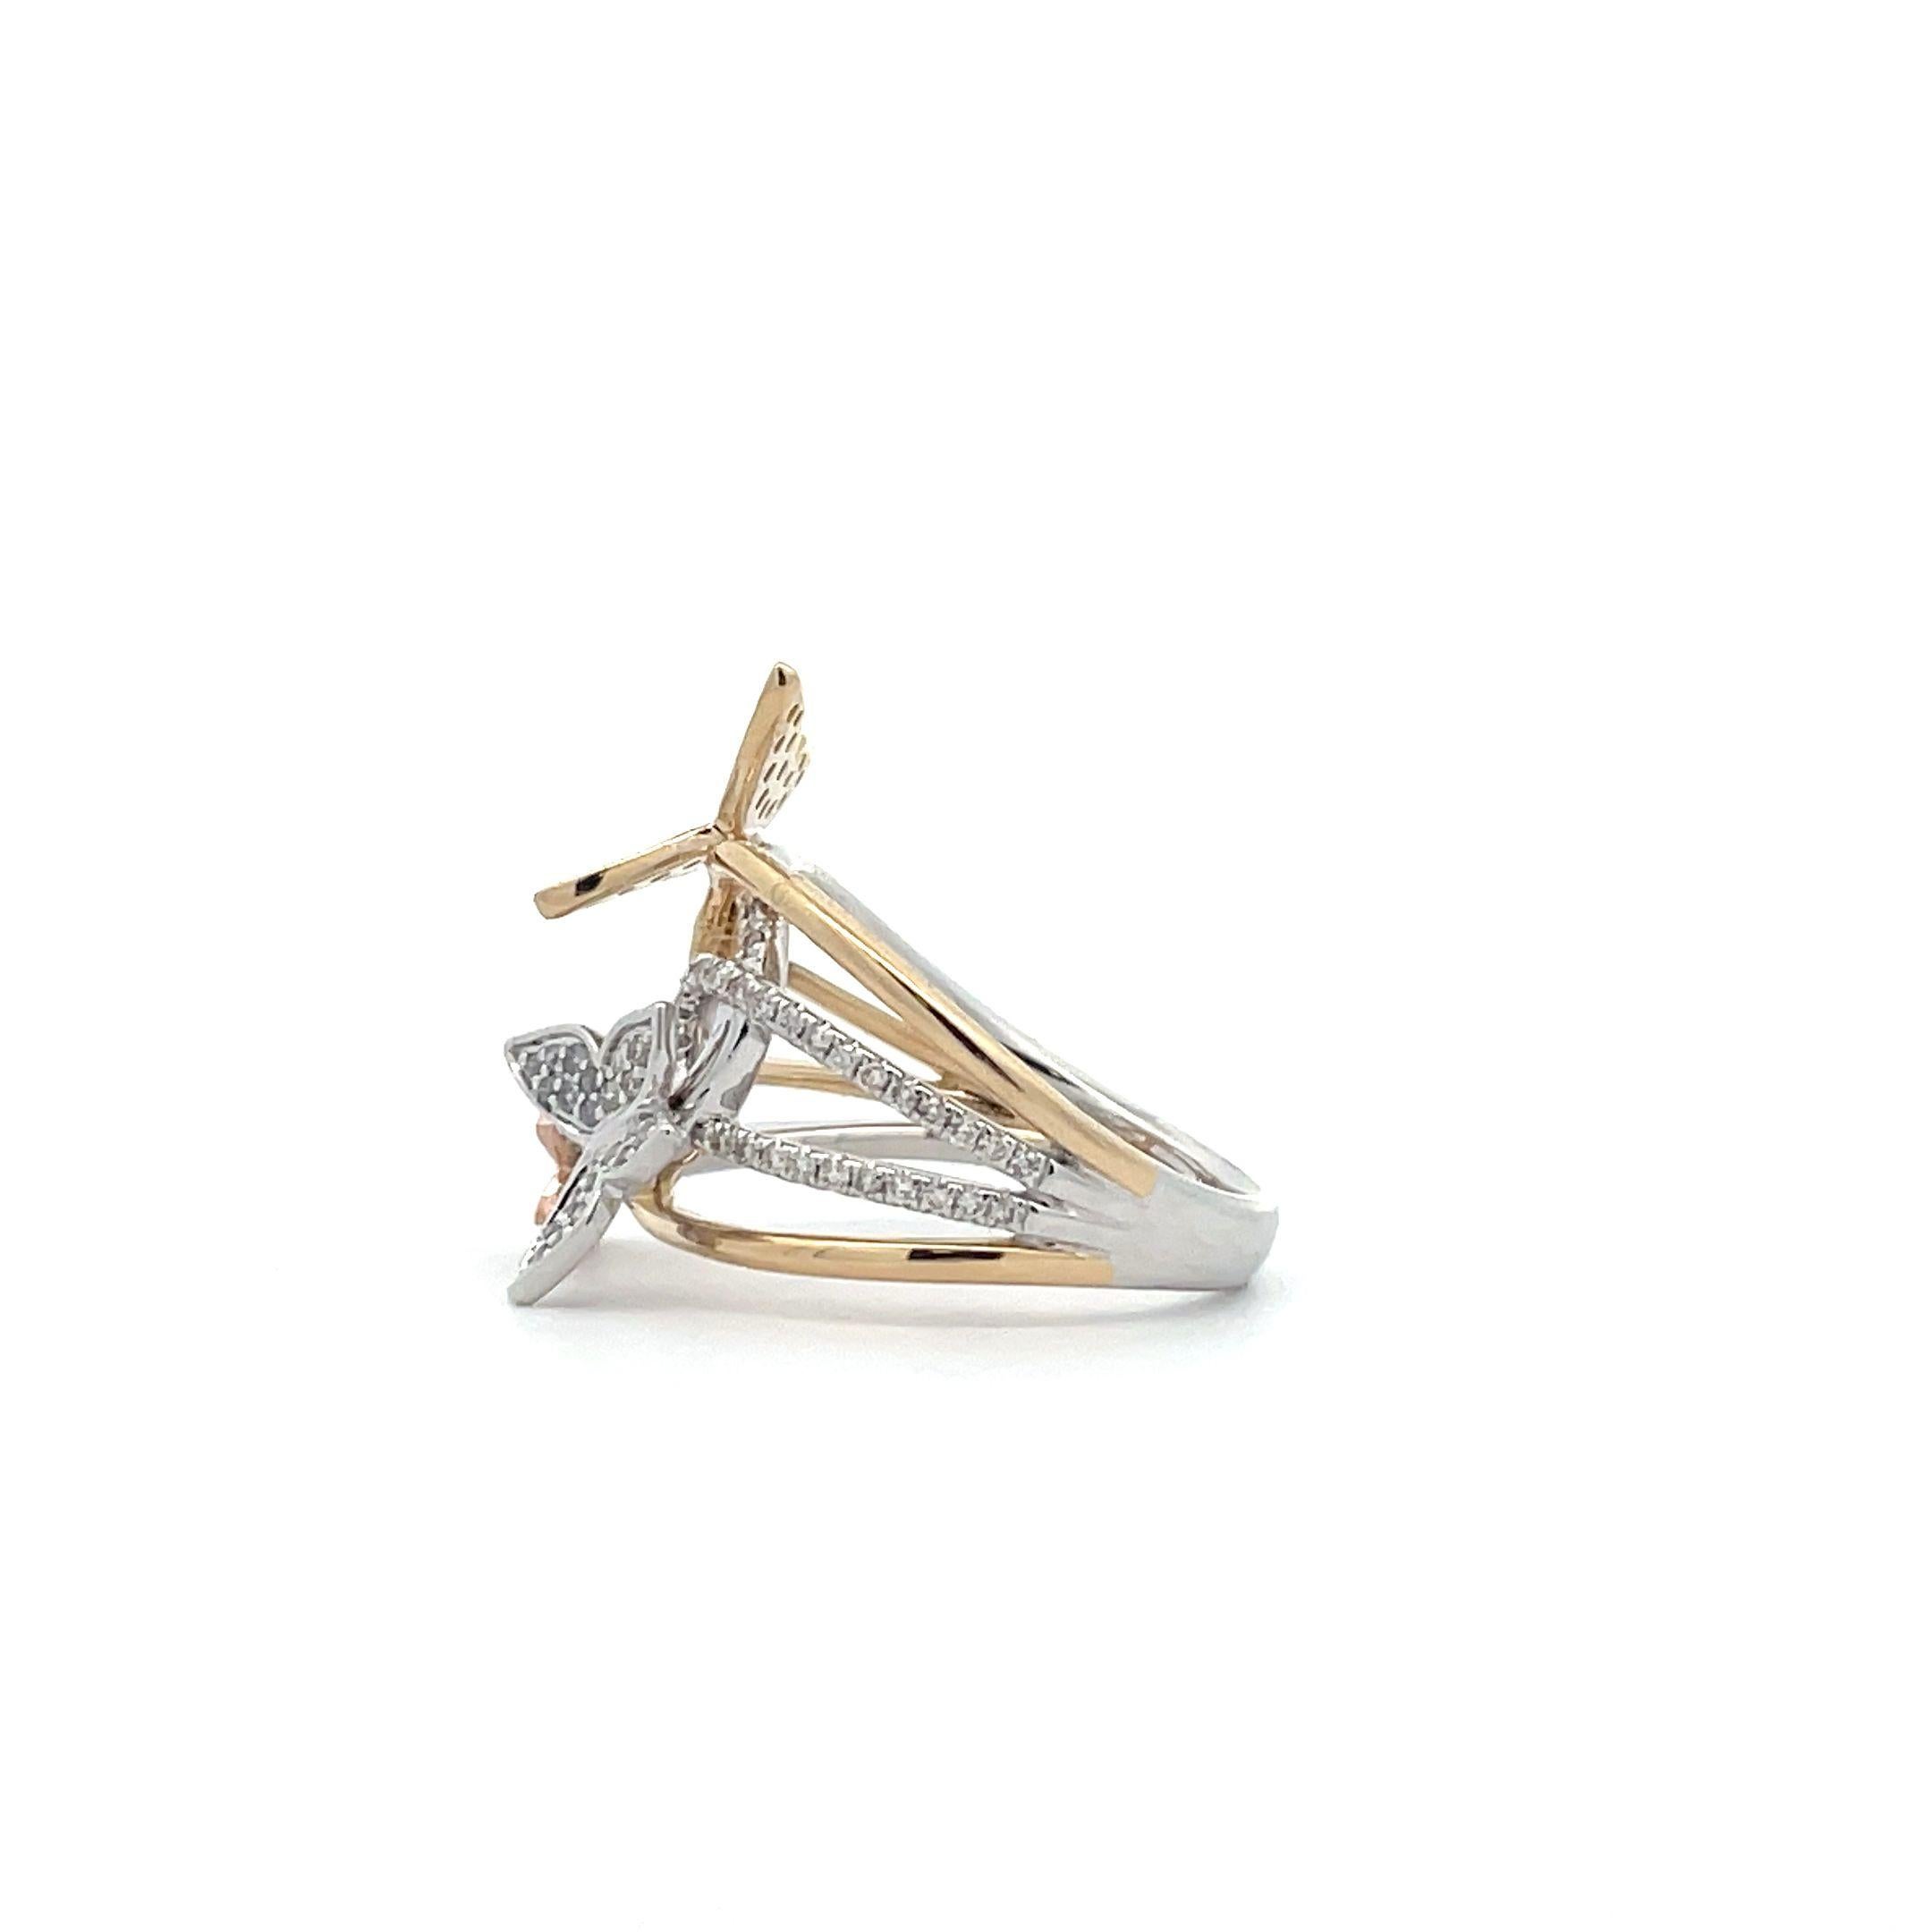 A splash of color with this stunning cocktail ring. Featuring 0.48 CT diamond that is handcrafted by professional artisan, this piece is finished in 14K Yellow, White and Rose Gold with a butterfly design. Perfect for everyday wear, you’ll love the